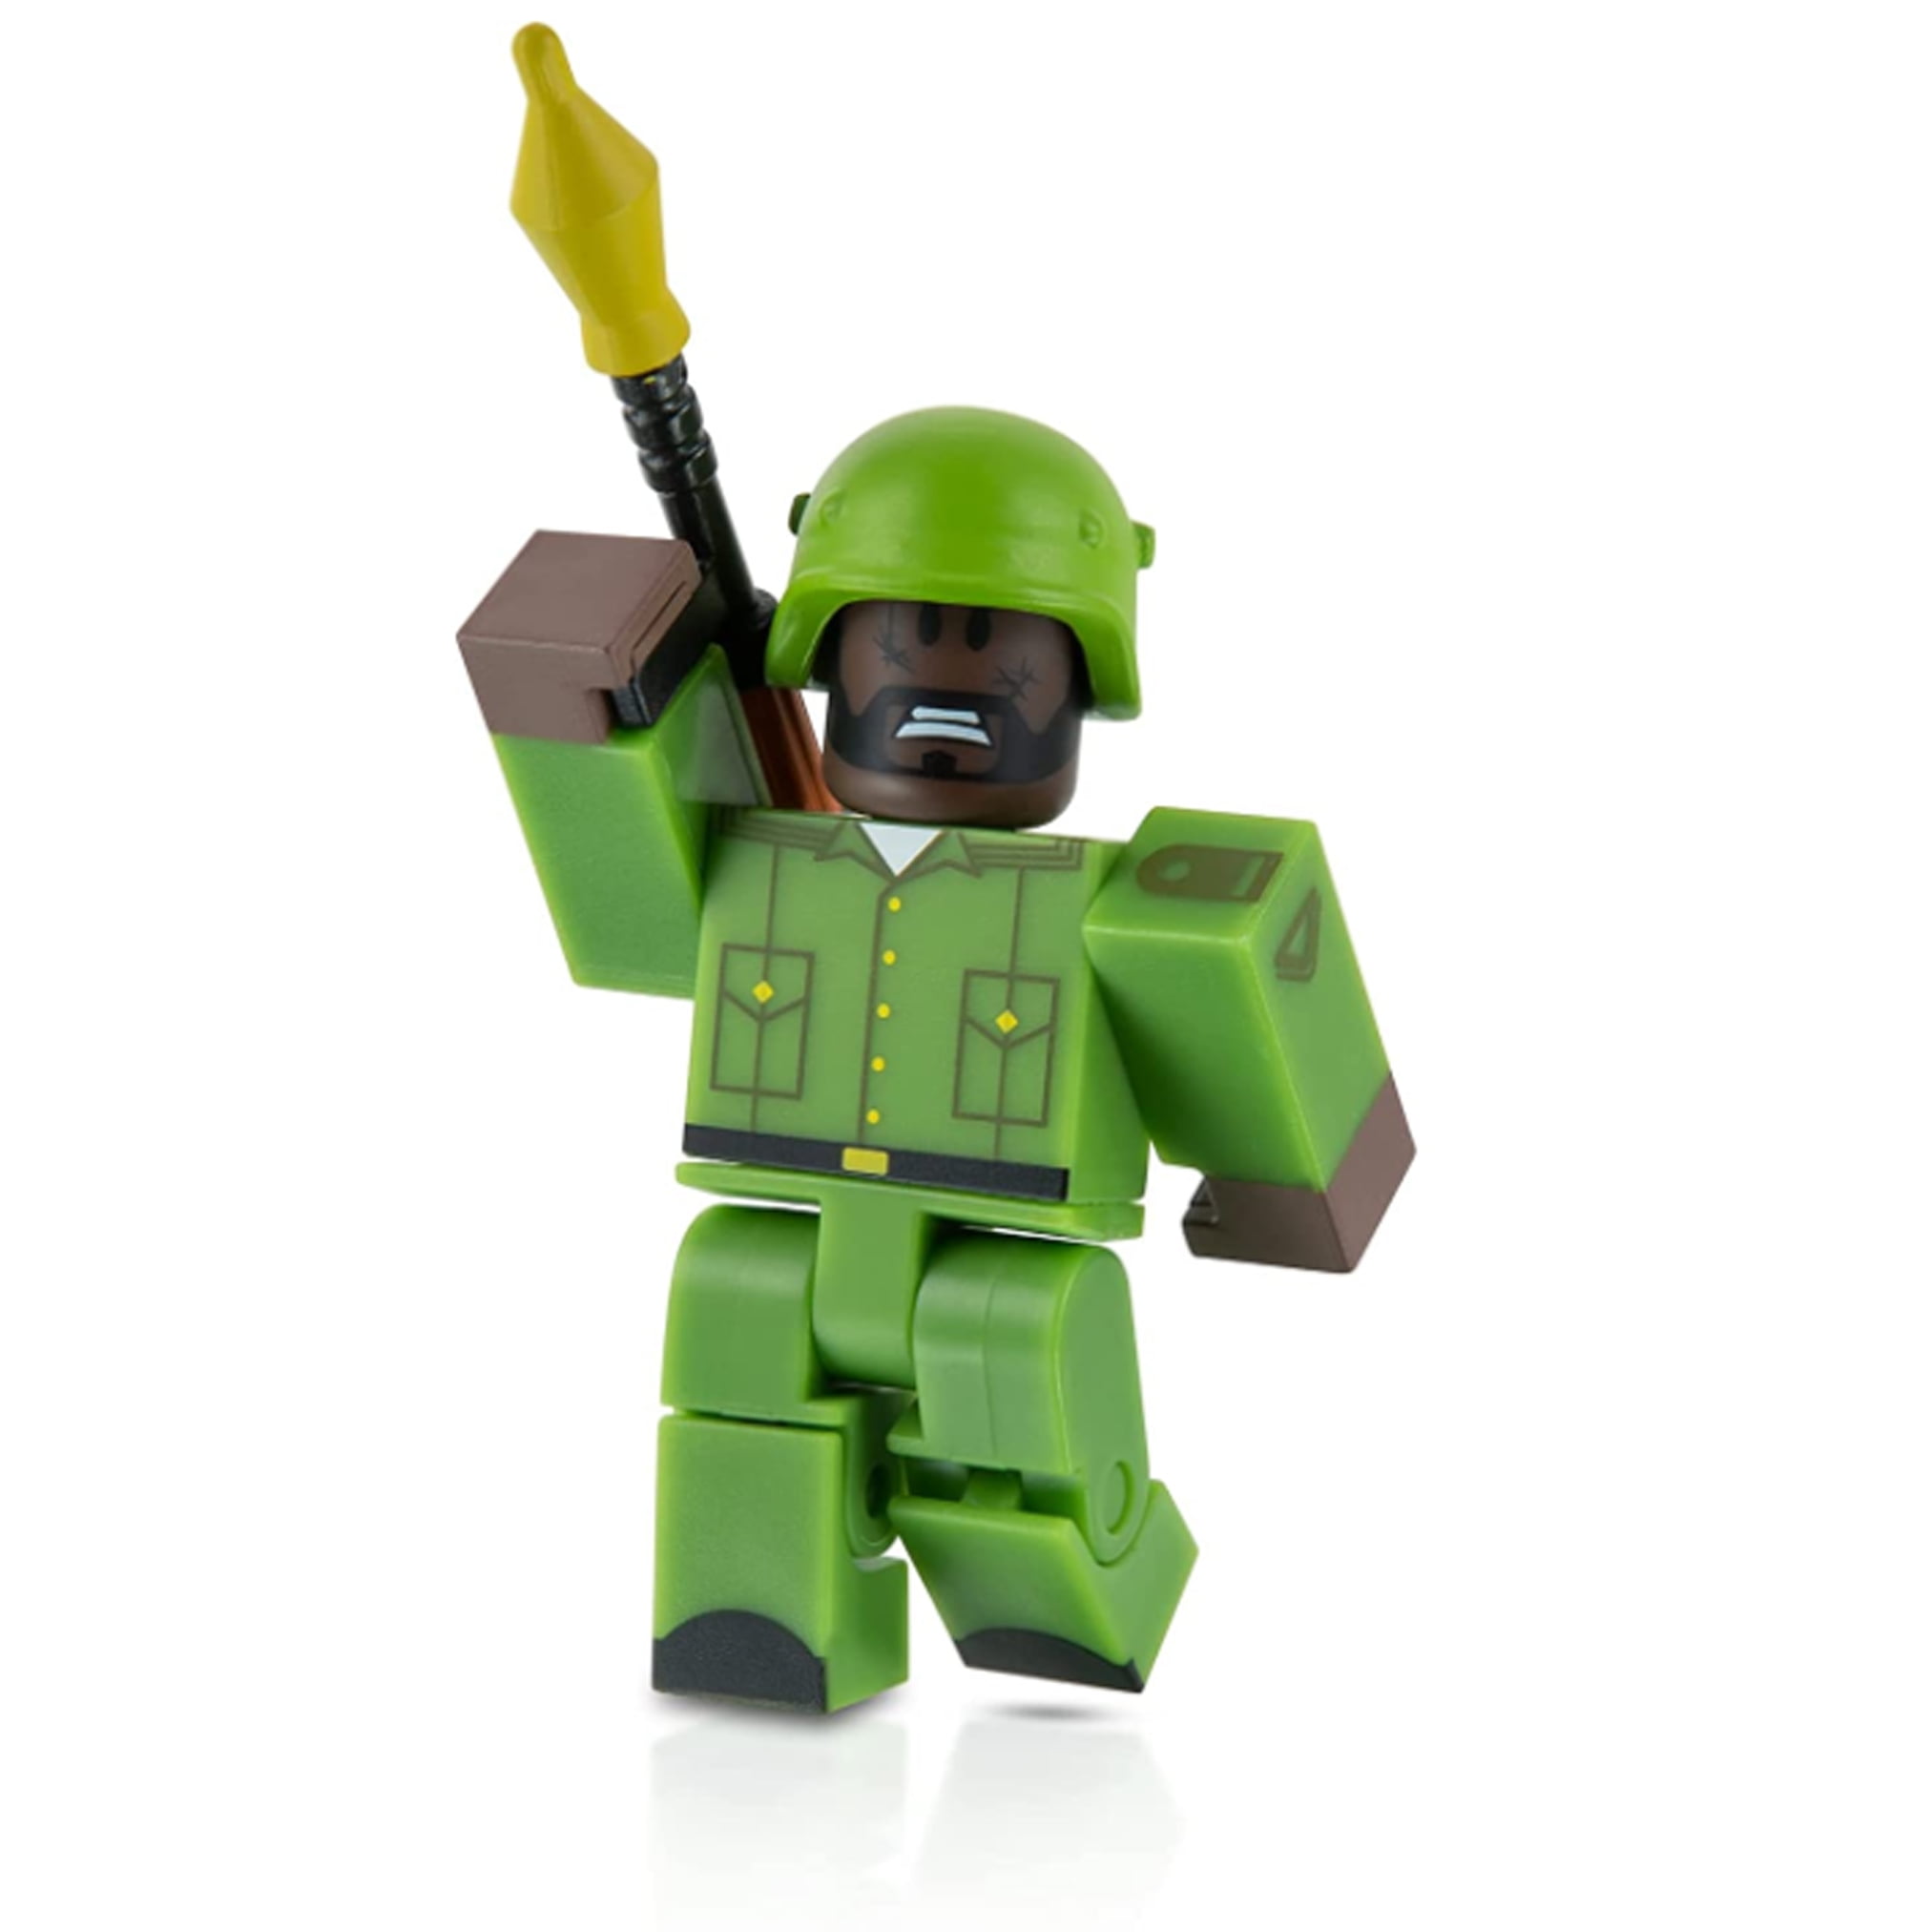 Dangerous Egg of Toy Soldiers - Roblox